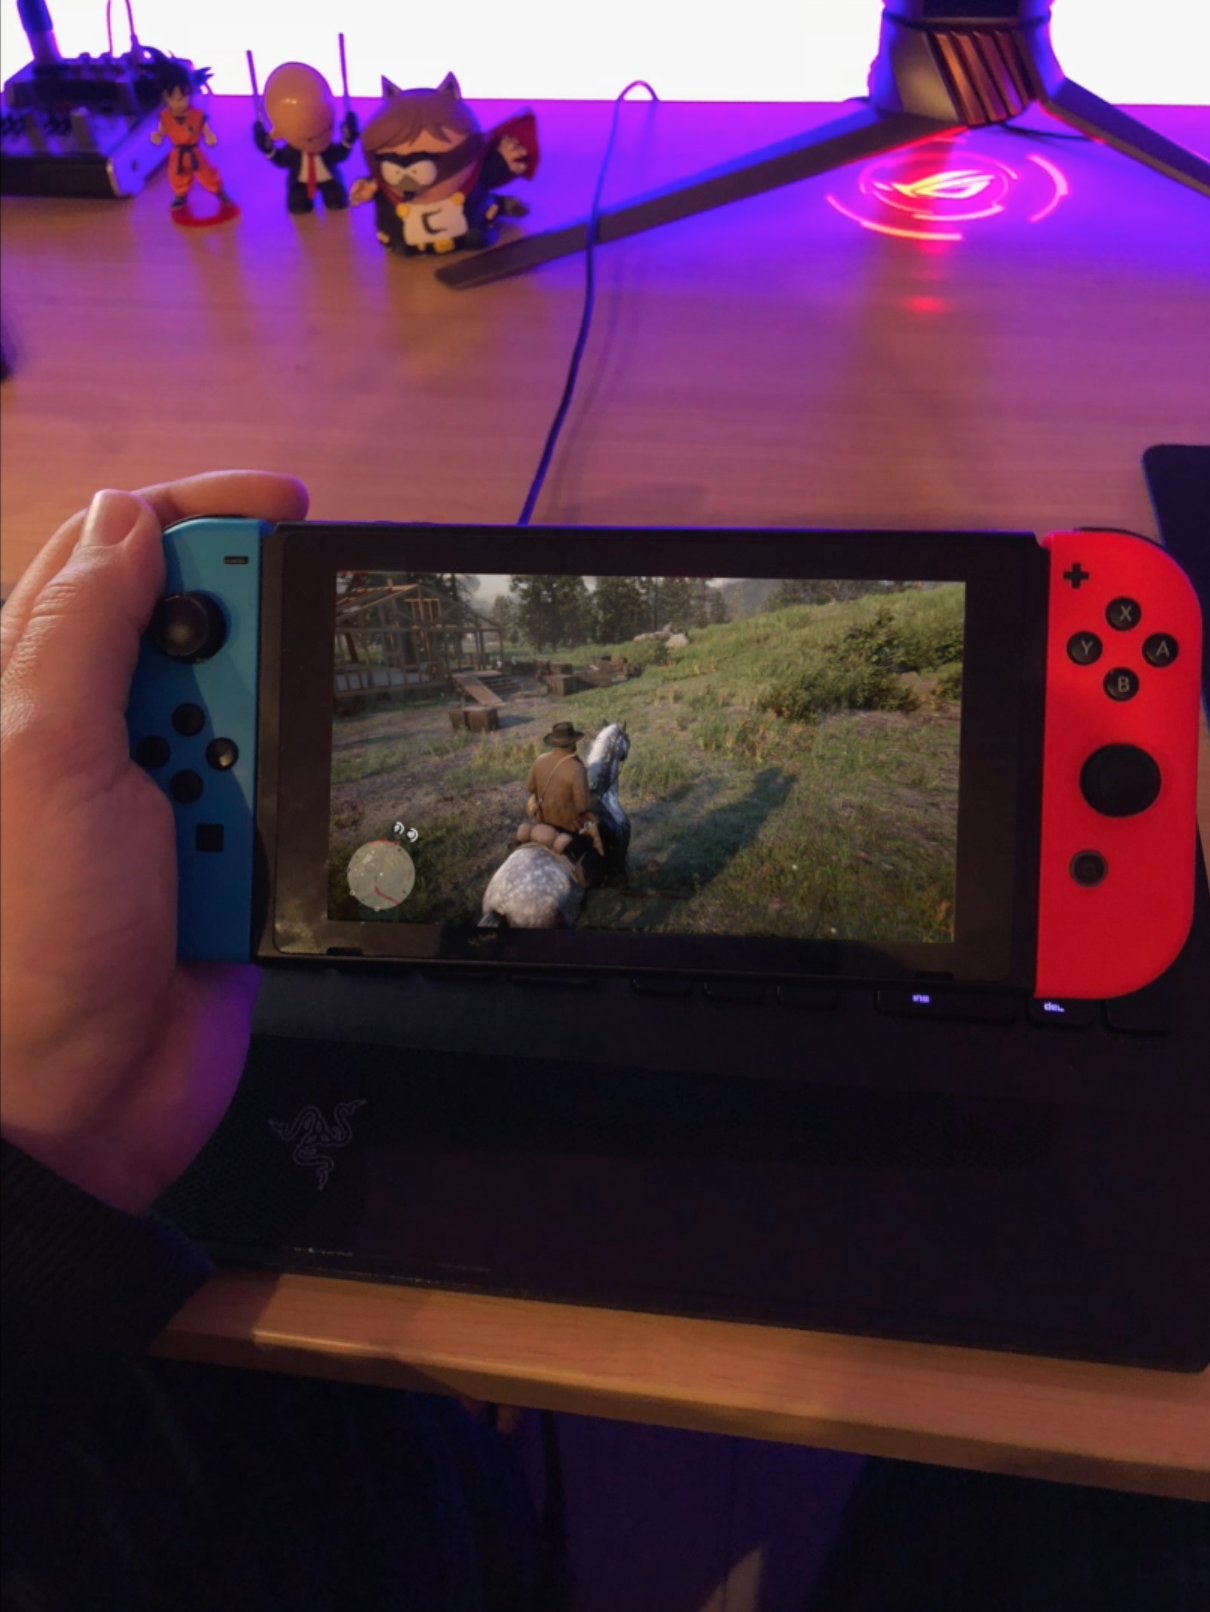 Champ on Twitter: "Red Dead Redemption 2 the Nintendo runs surprisingly So surprising I actually don't believe it... https://t.co/a6d3CWkheZ" / Twitter